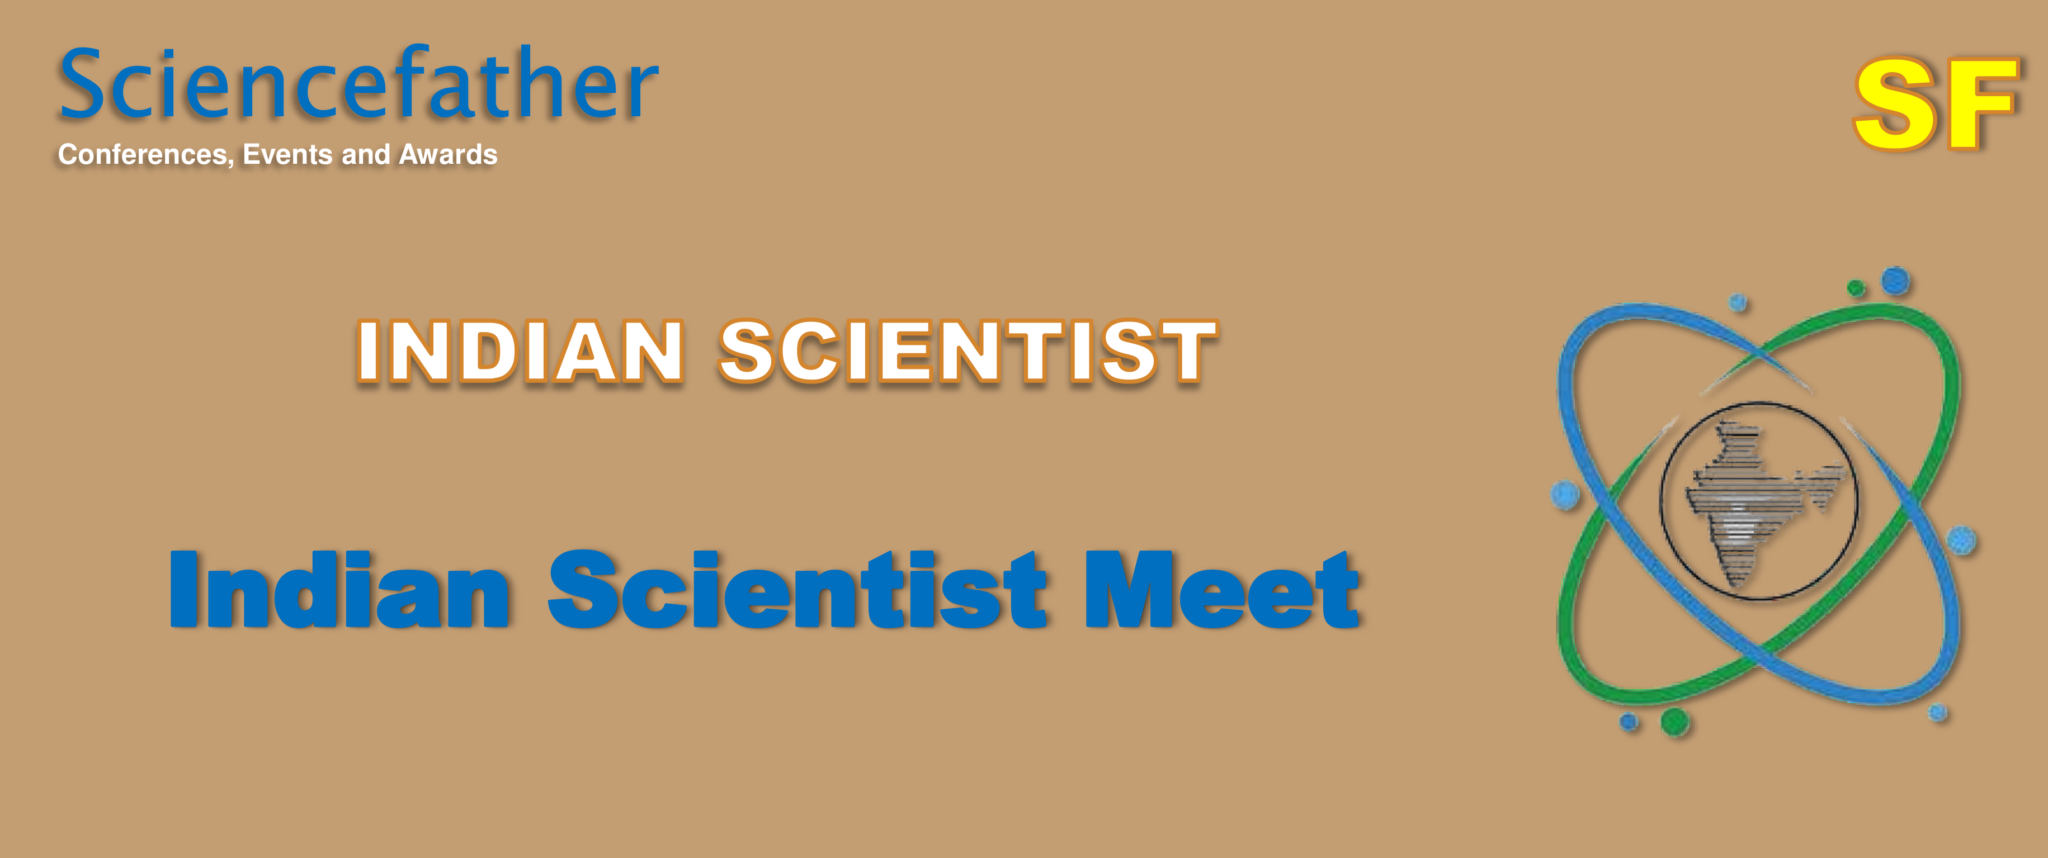 8 th Edition of Indian Scientist Meet, Online Event